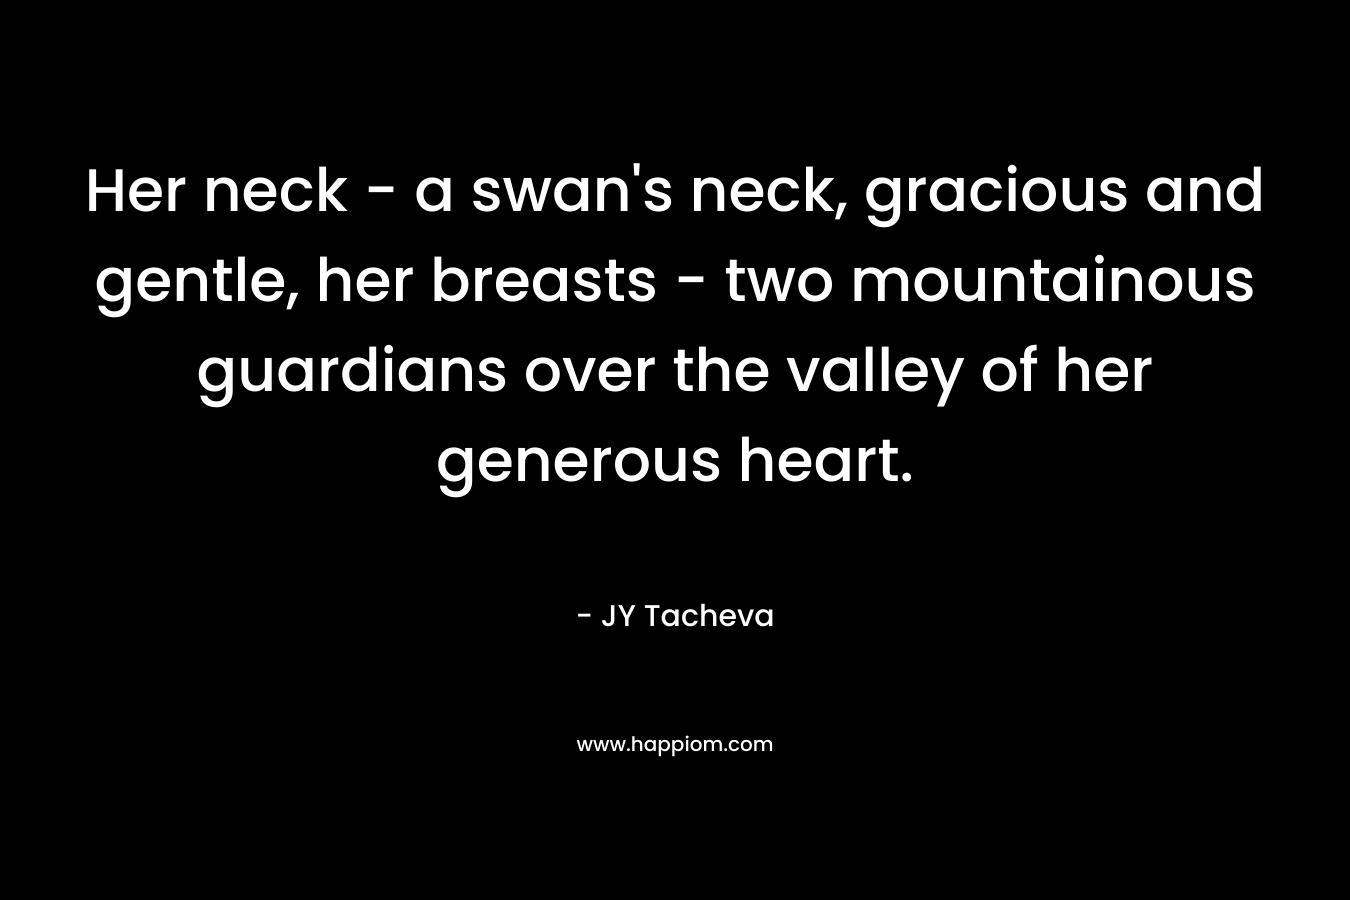 Her neck - a swan's neck, gracious and gentle, her breasts - two mountainous guardians over the valley of her generous heart.